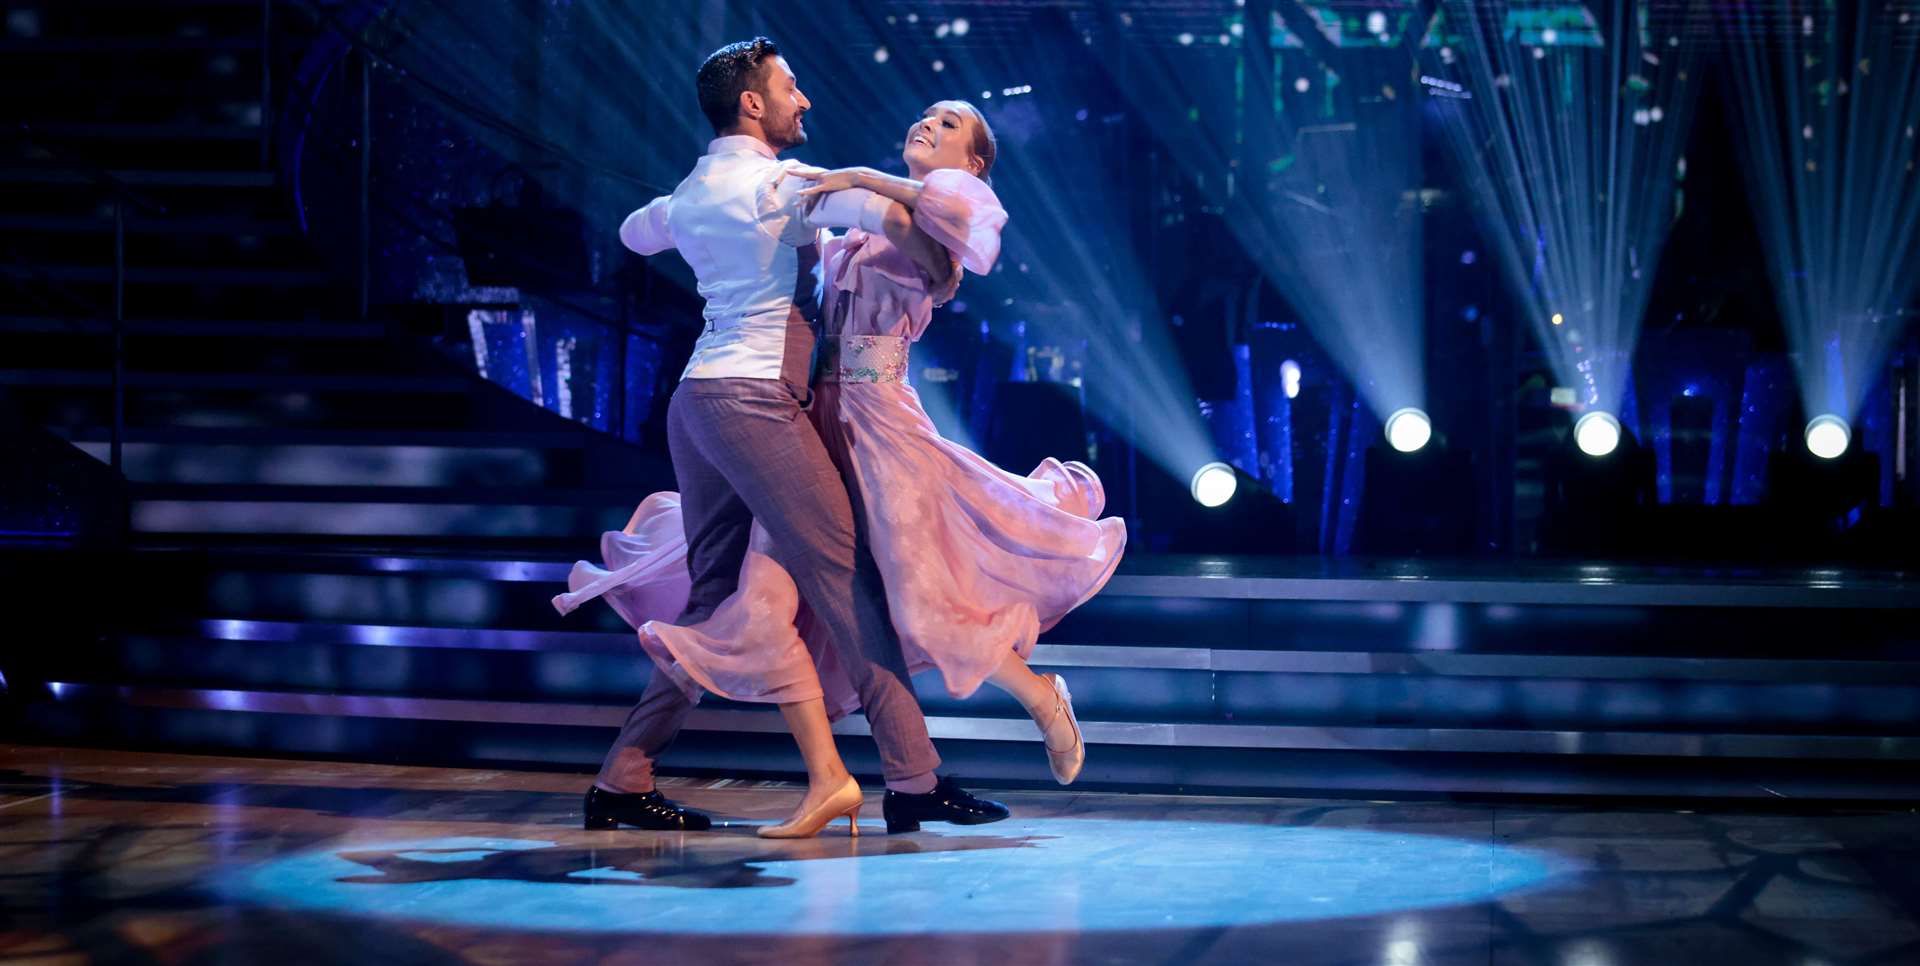 Rose was partnered with professional dancer Giovanni Pernice. Picture: BBC/Guy Levy